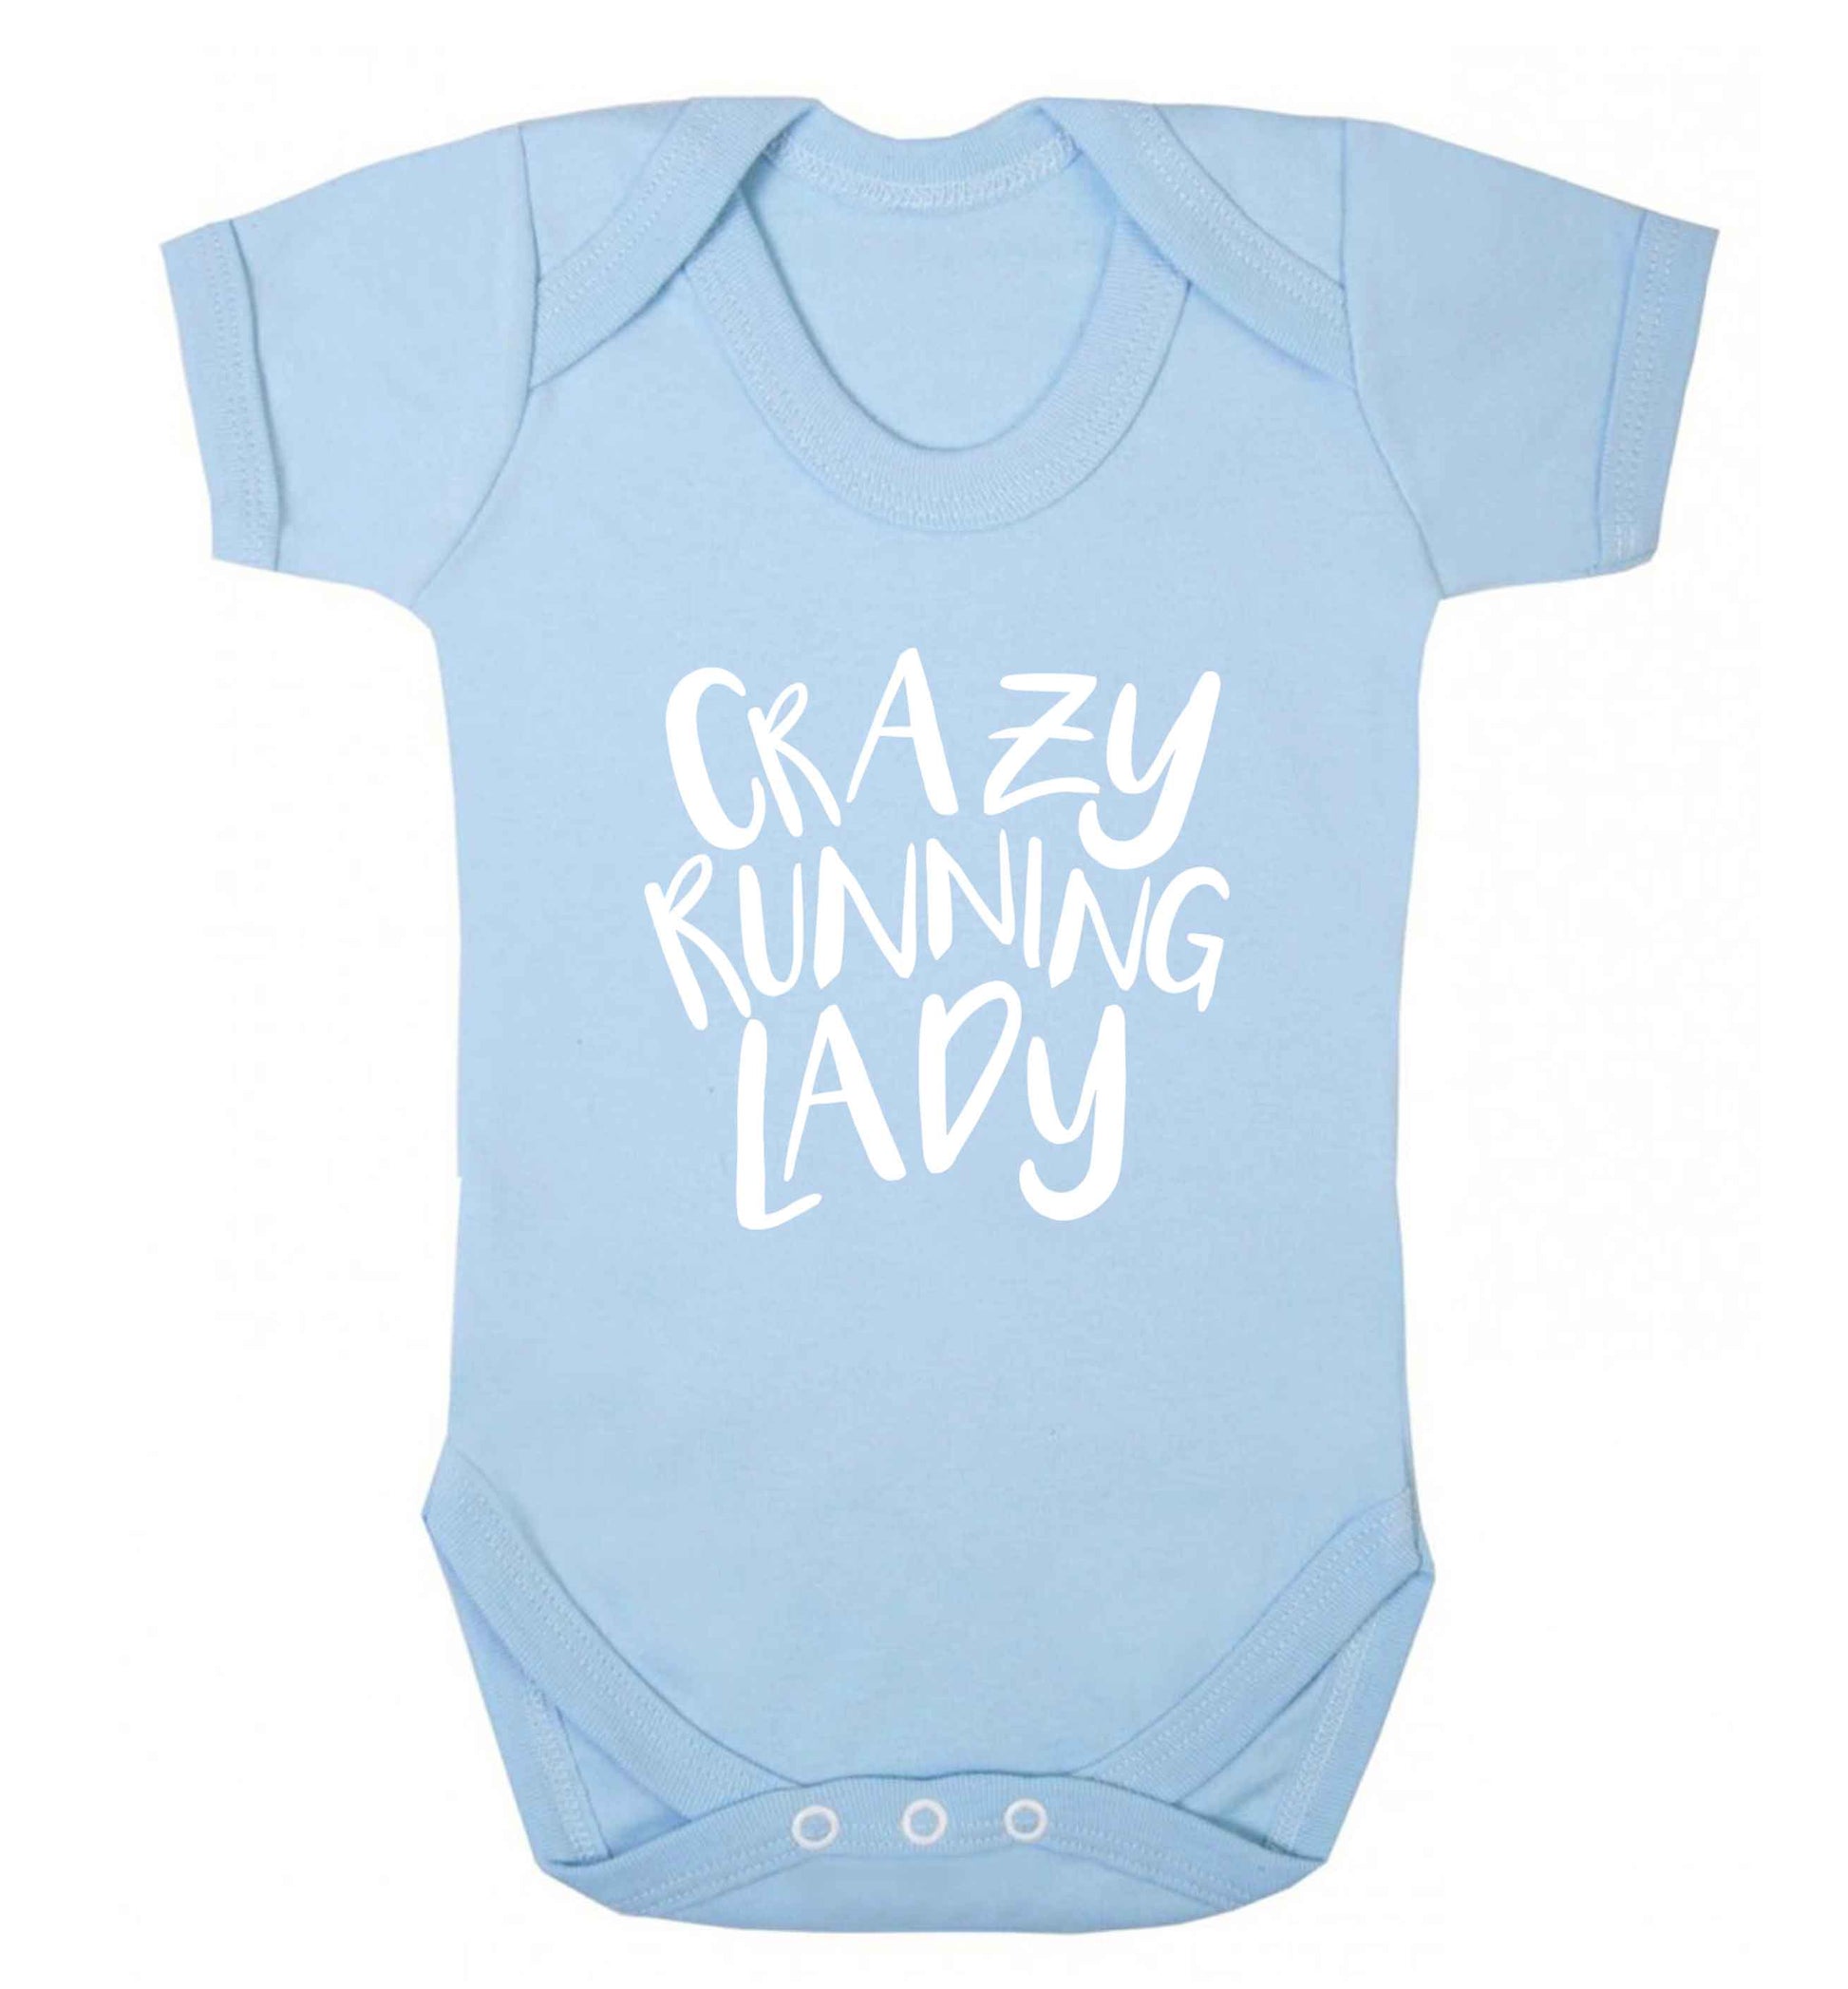 Crazy running lady baby vest pale blue 18-24 months